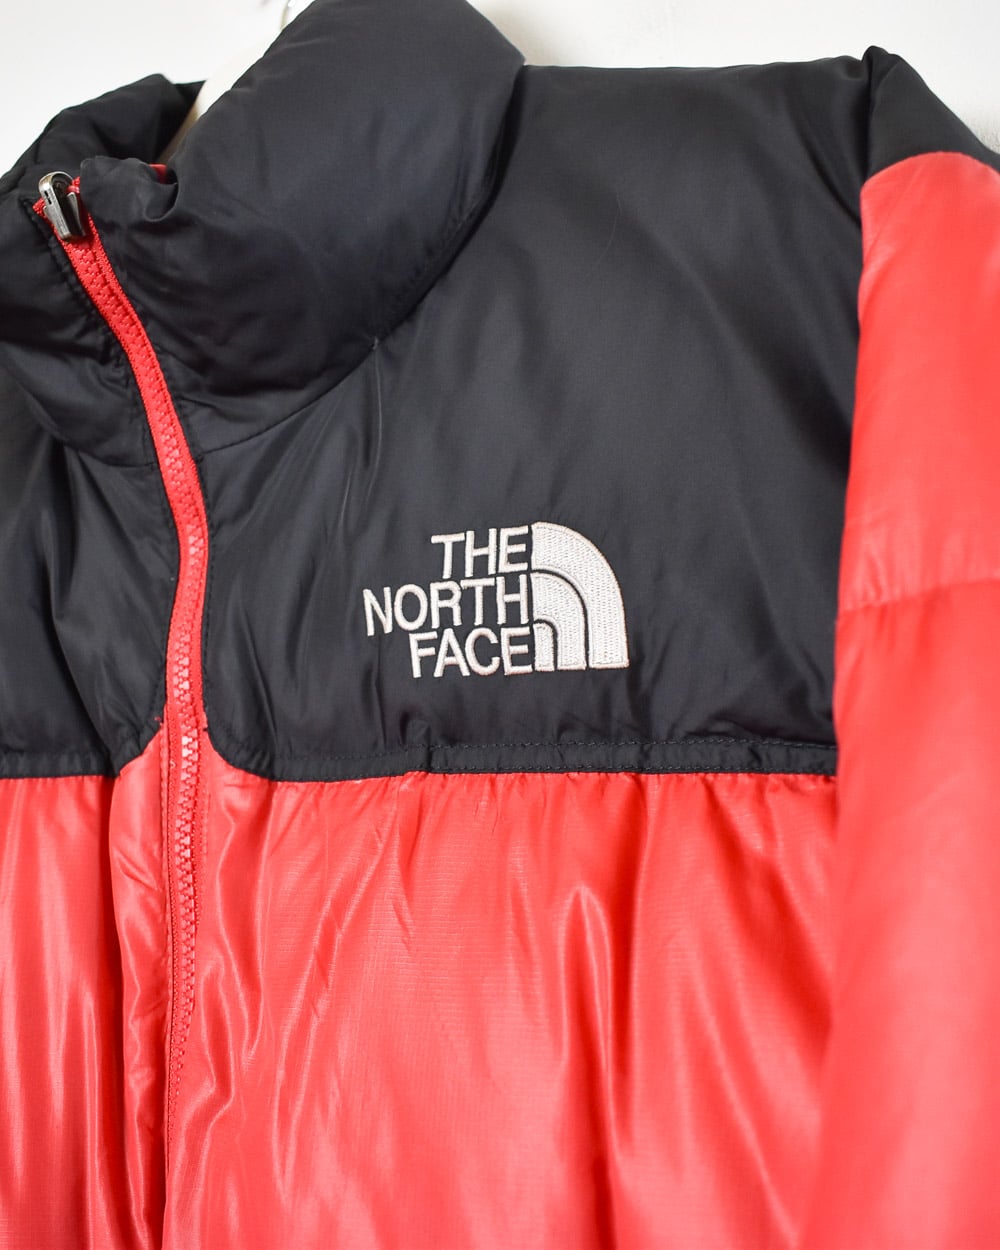 Red The North Face Nuptse 700 Down Puffer Jacket - Medium